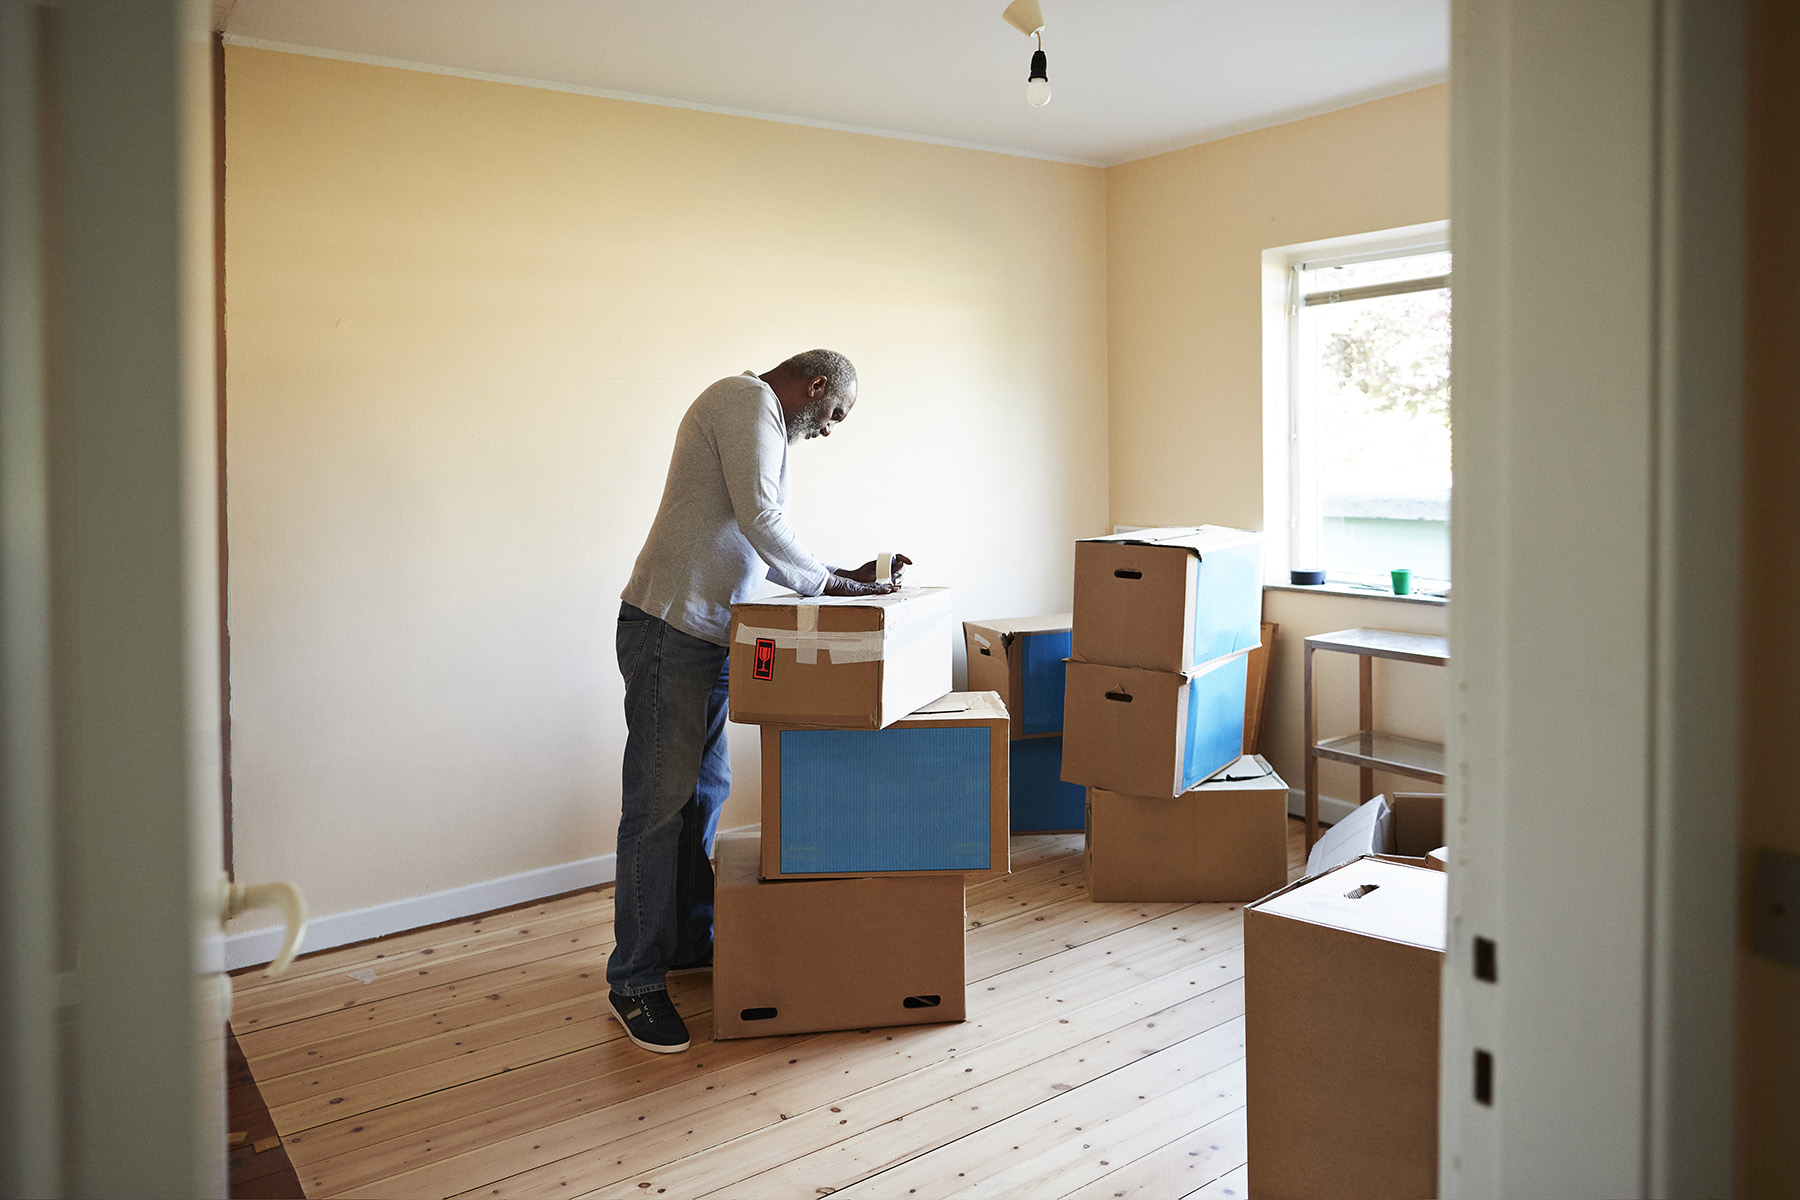 Man standing in an empty room (except for moving boxes), taping a box while getting ready to relocate. 